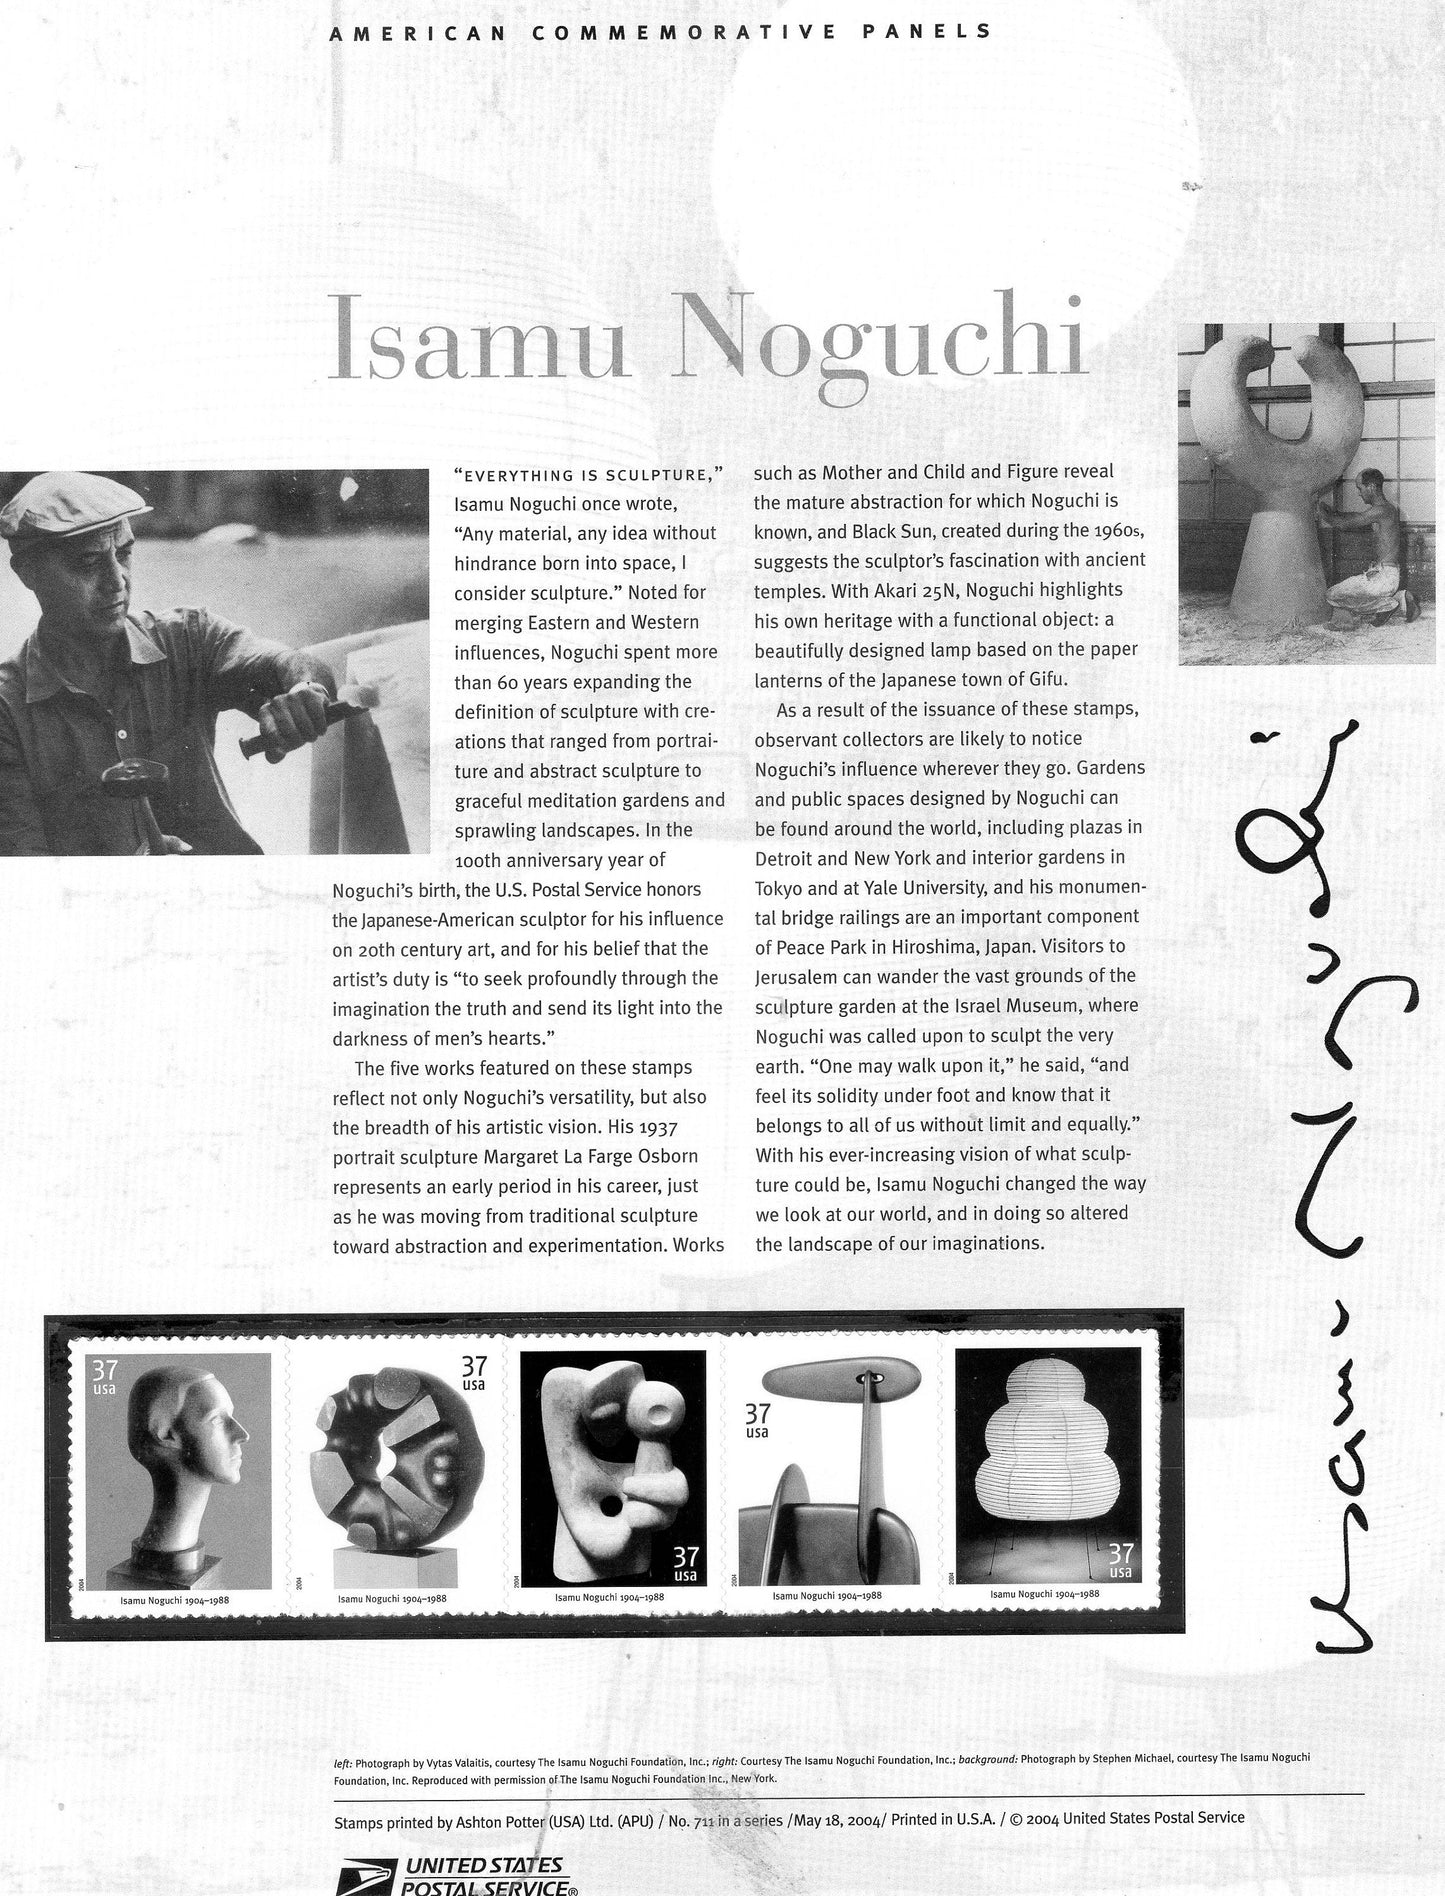 NOGUCHI SCULPTURE ART Japan Abstract Lamp Head Commemorative Panel with Strip 5 Stamps Illustrations plus Text – A Great Gift 8.5x11-2004